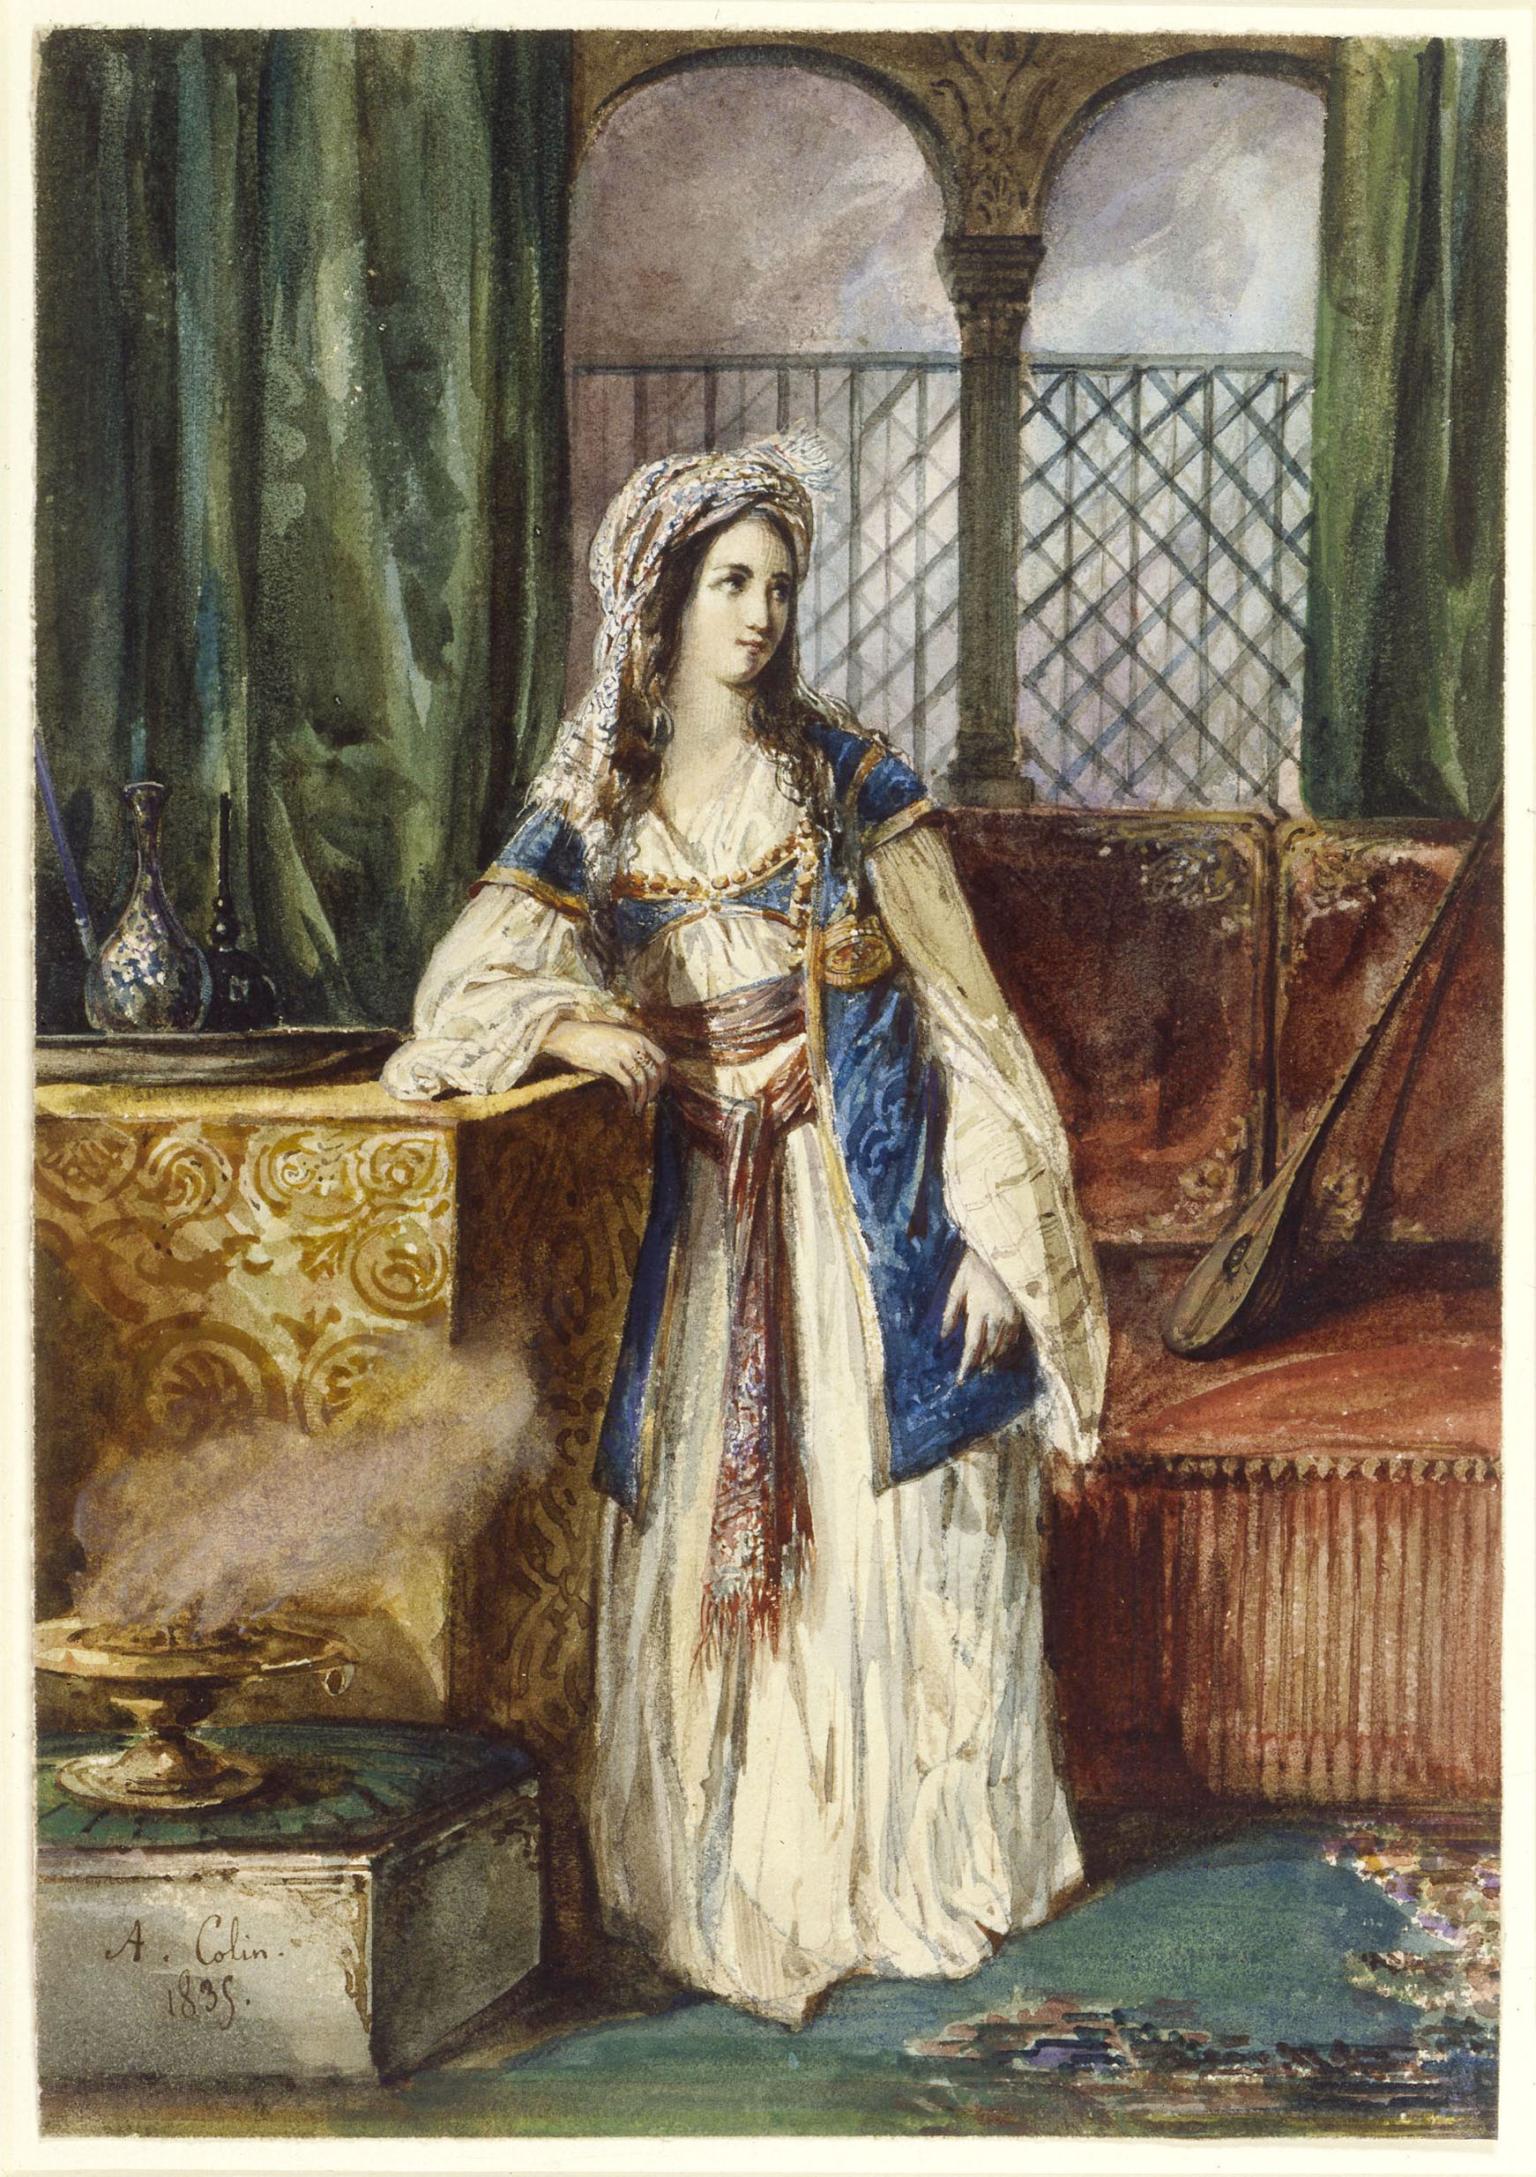 Painting of woman in headdress, loose dress, and vest leaning against table decorated with roses next to burning brazier, with arched windows and instrument in background. 